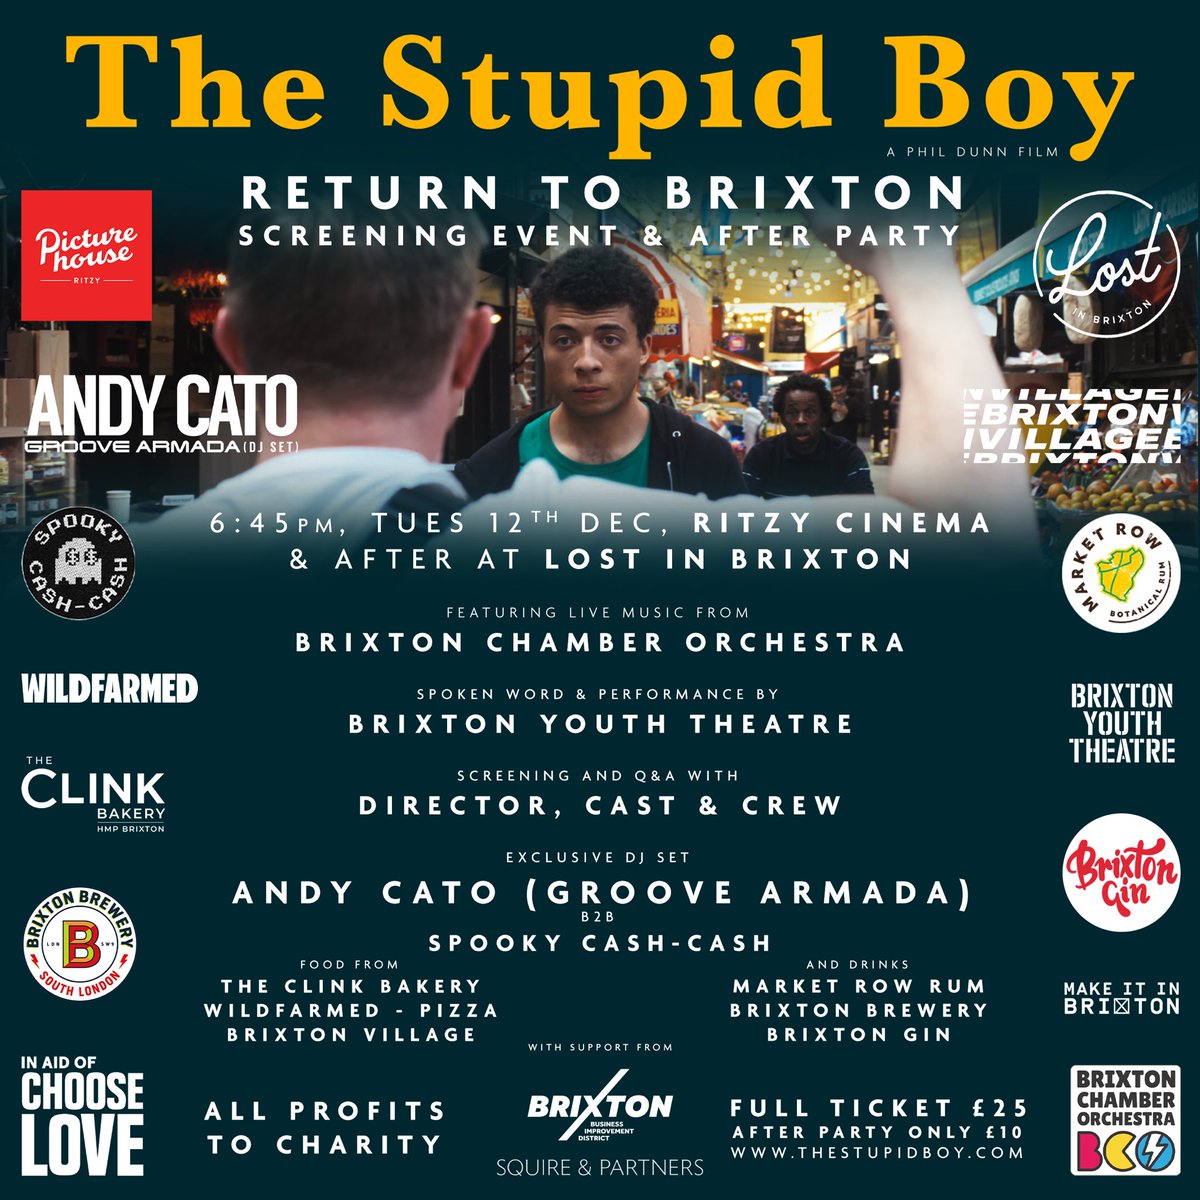 #AndyCato @GrooveArmada will DJ at our After Party on 12th Dec 8:45pm - tickets only £10. Come for the whole evening & get our film, local #Brixton food, drinks, spoken word & an orchestra all included for £25! All profits to @chooselove Buy tickets here: thestupidboy.com